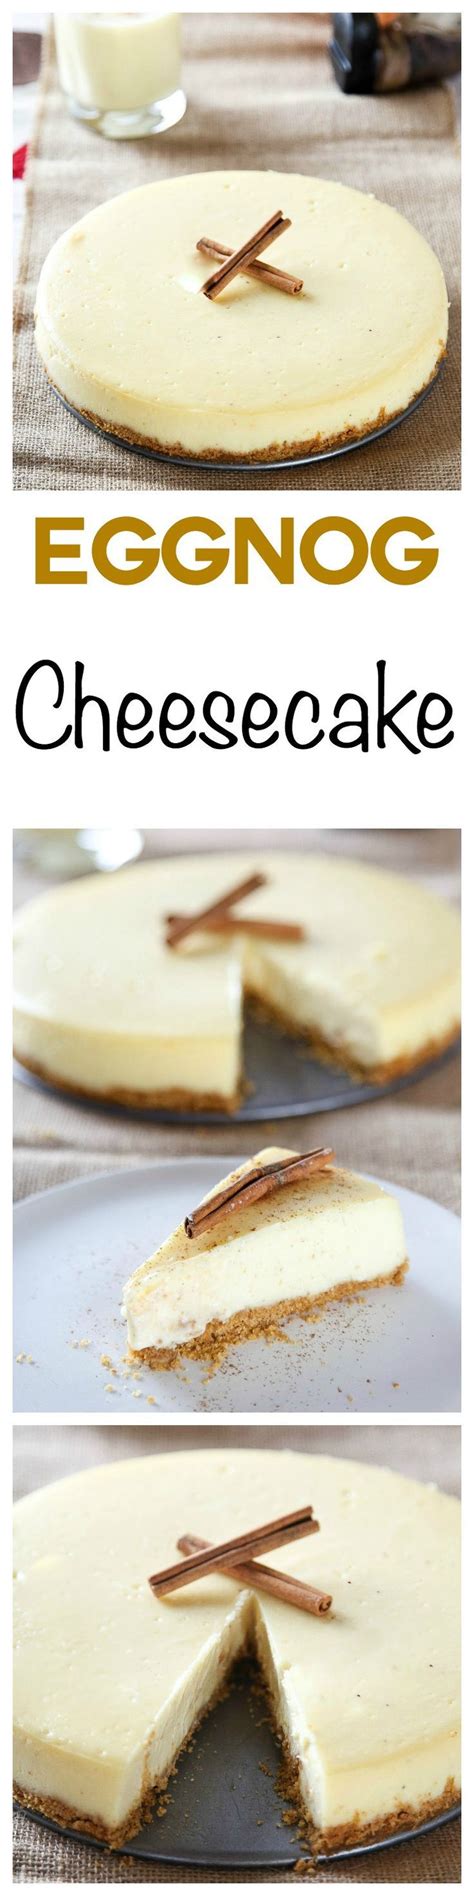 During the week of christmas she had tremors. Eggnog Cheesecake | Recipe | Desserts, Decadent christmas ...